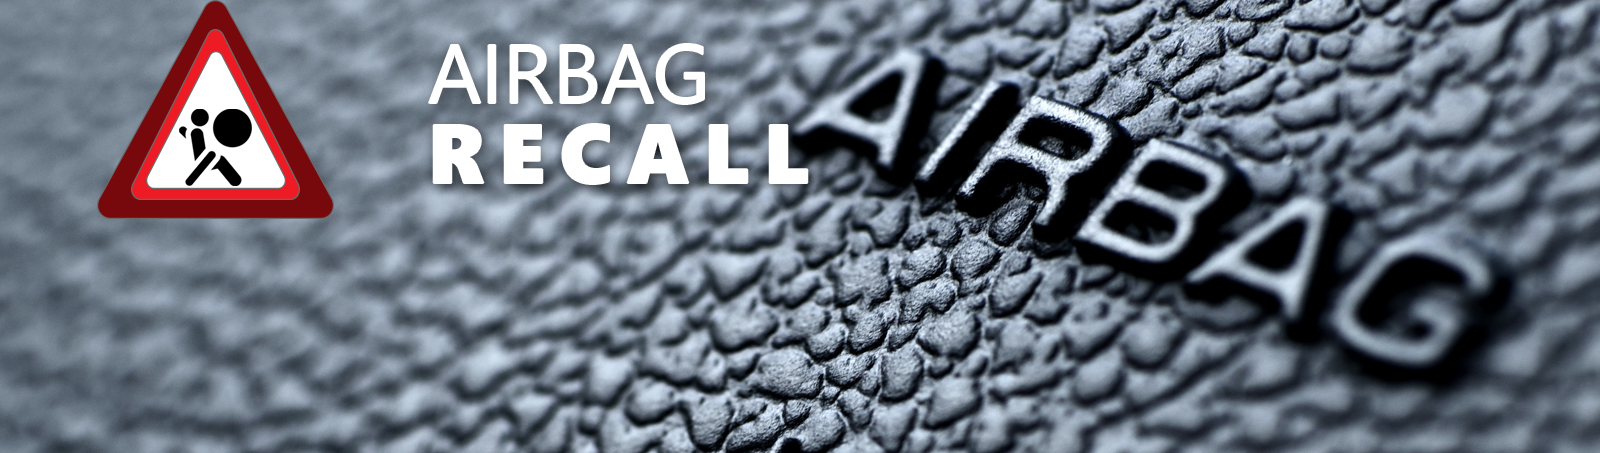 Airbag Recall Information